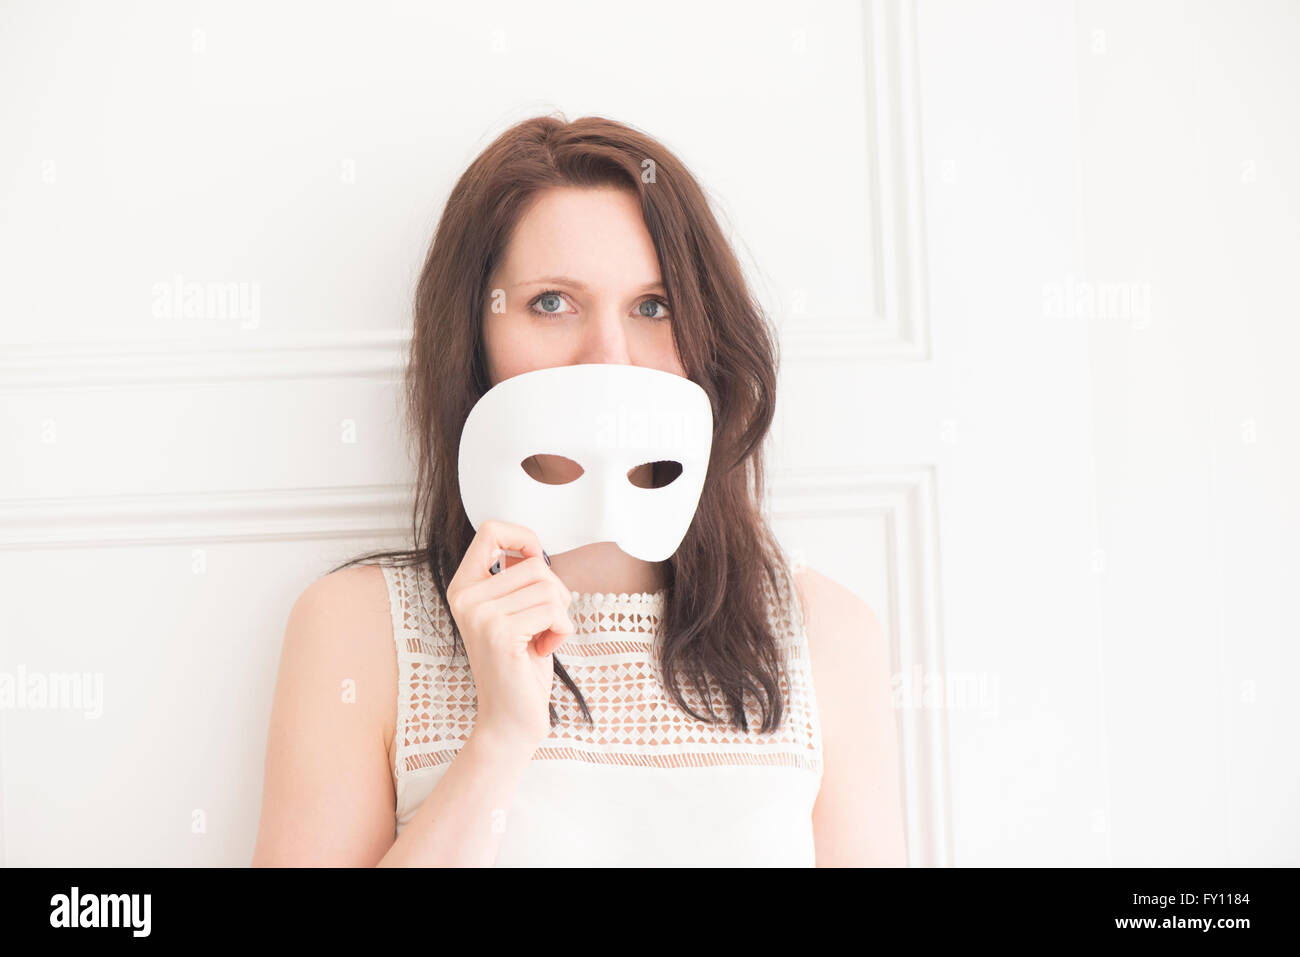 Woman holding white face mask. Concept of identity, mischief, and fun. Playful lifestyle moment. Stock Photo